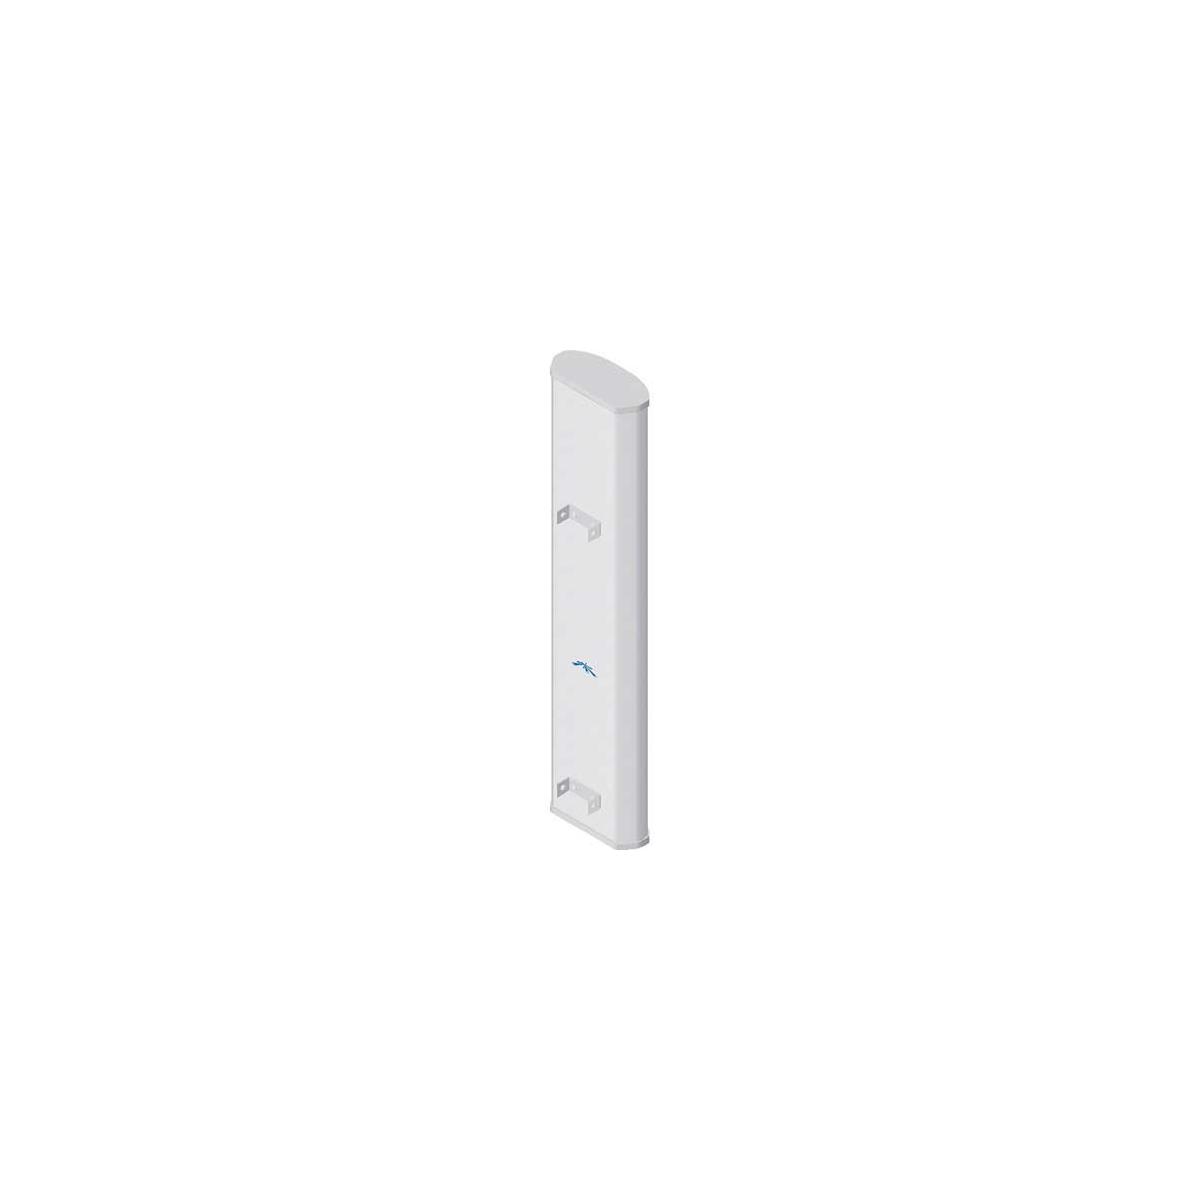 Image of Ubiquiti Networks airMAX 2x2 MIMO BaseStation Sector Antenna